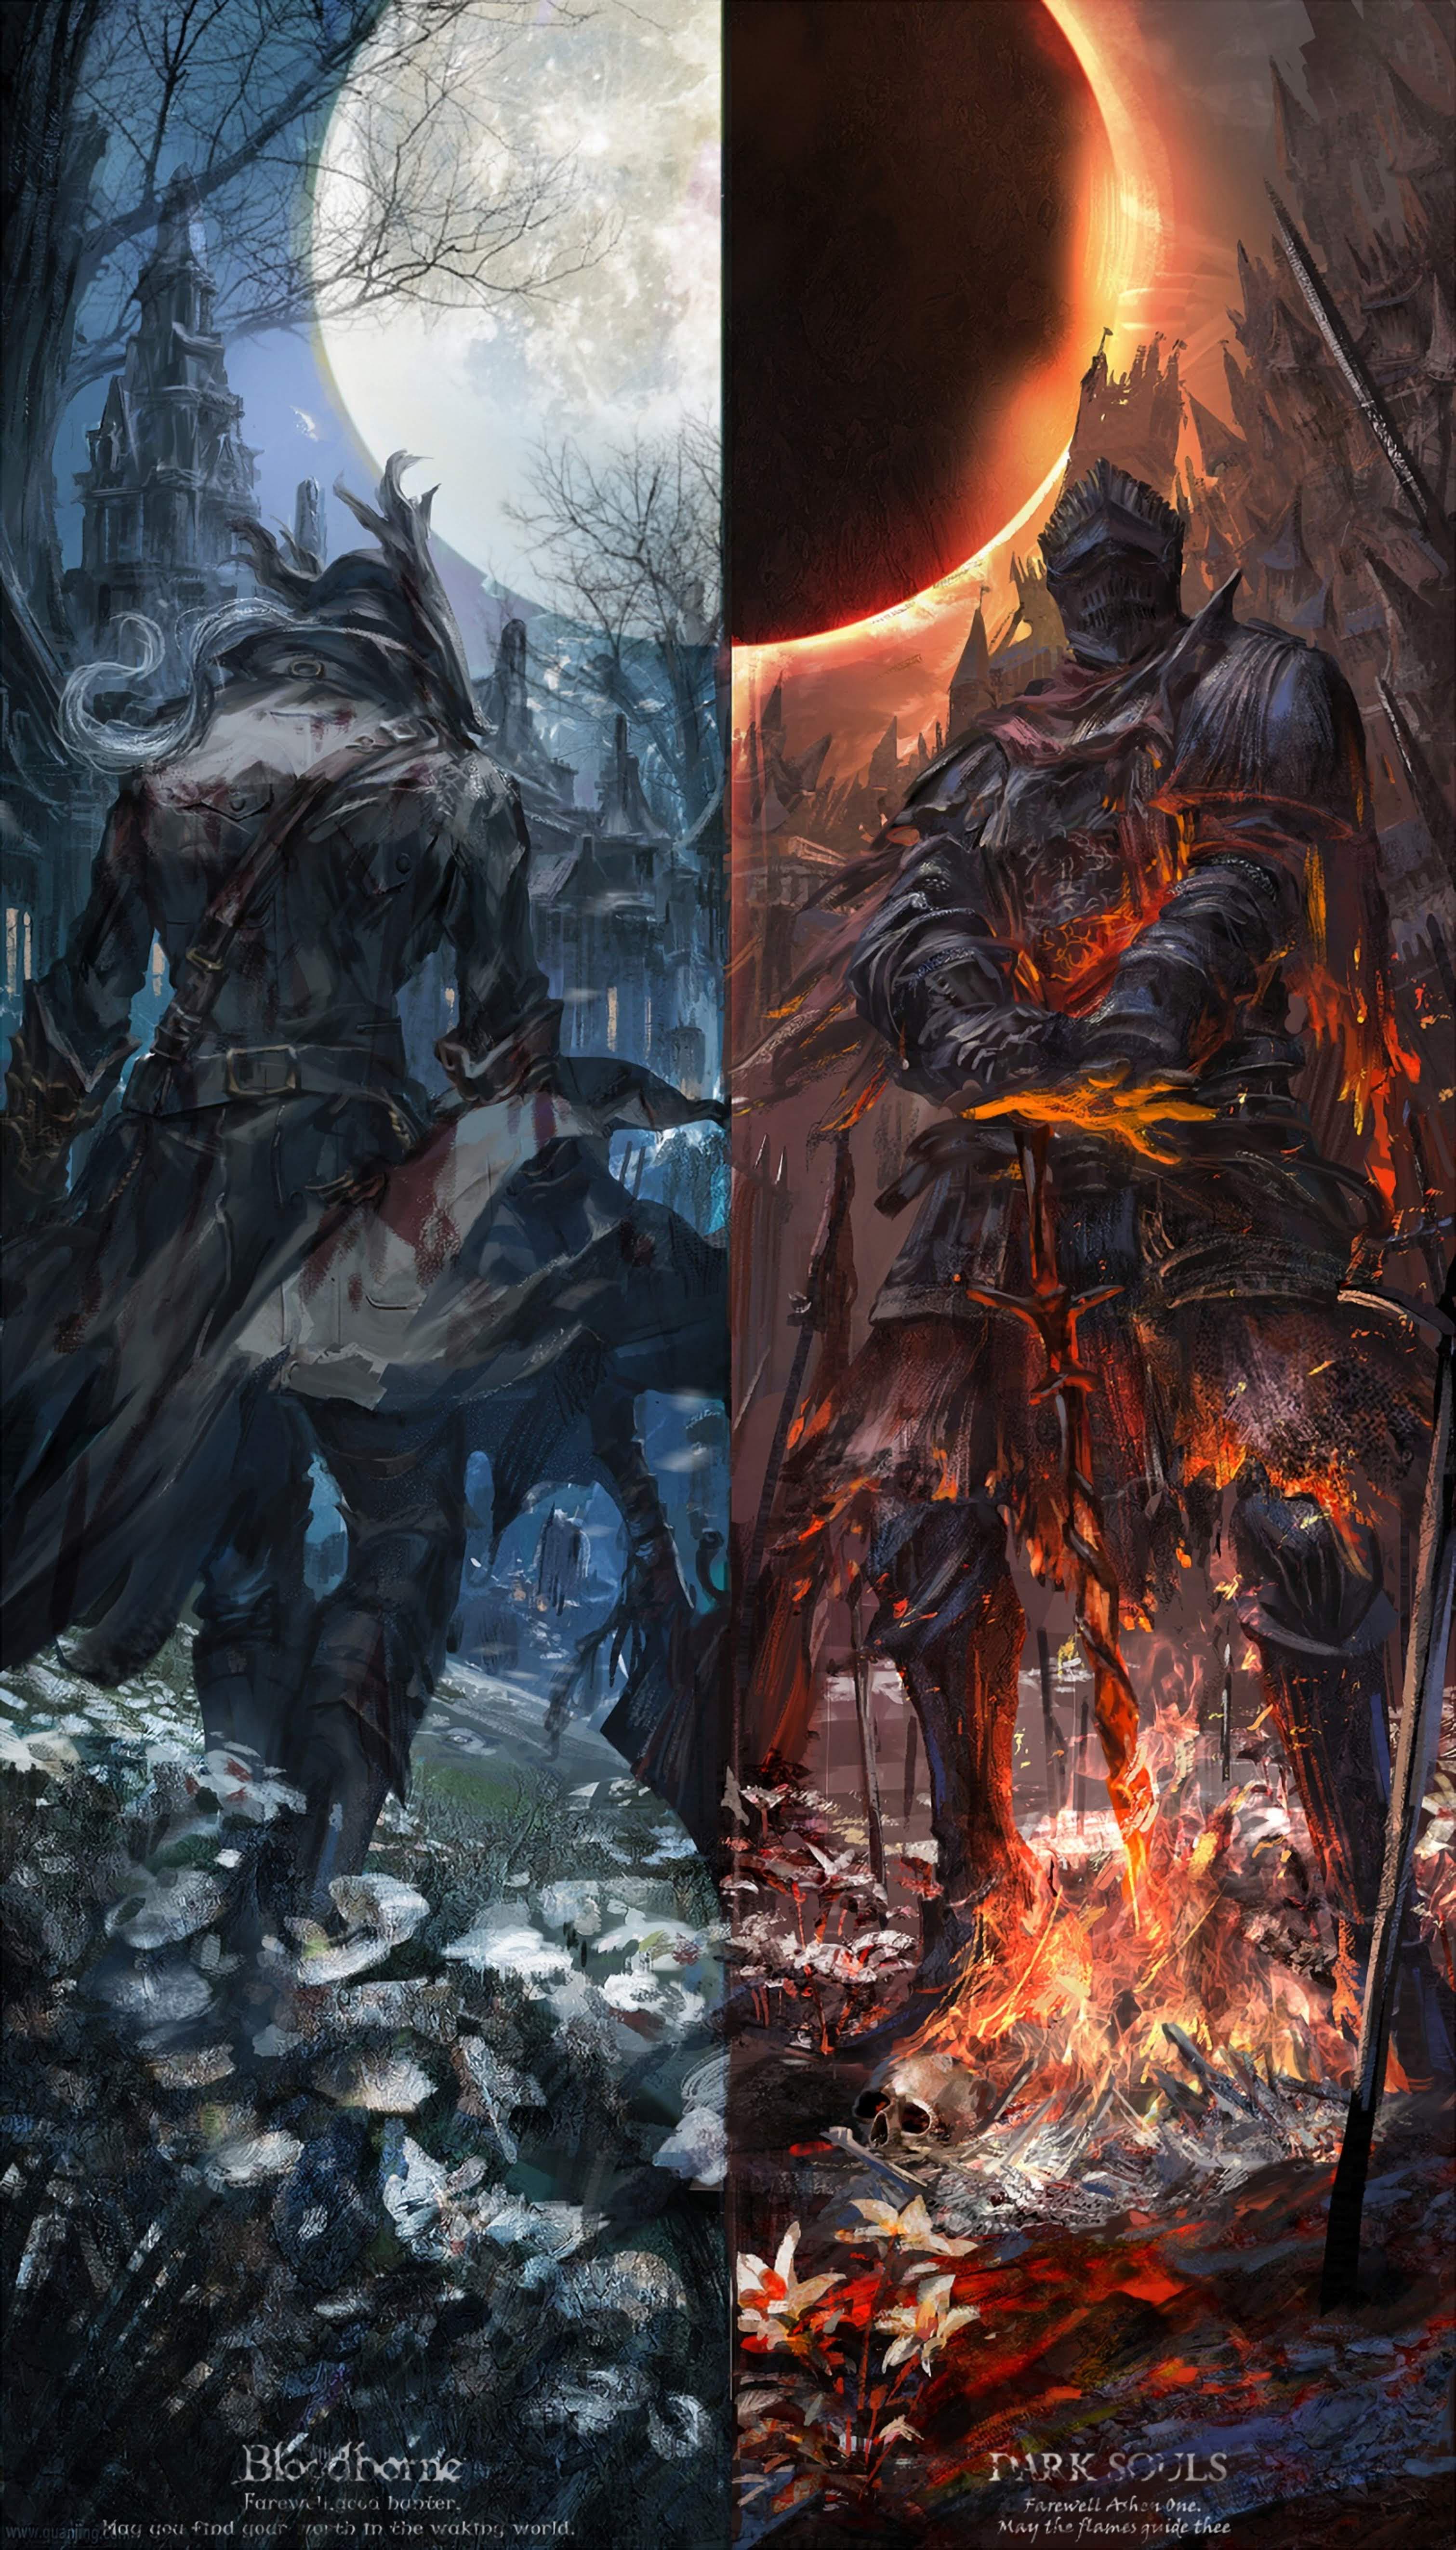 Can someone animate this Bloodborne / Dark souls 3 wallpaper in a Mobile and a PC version?